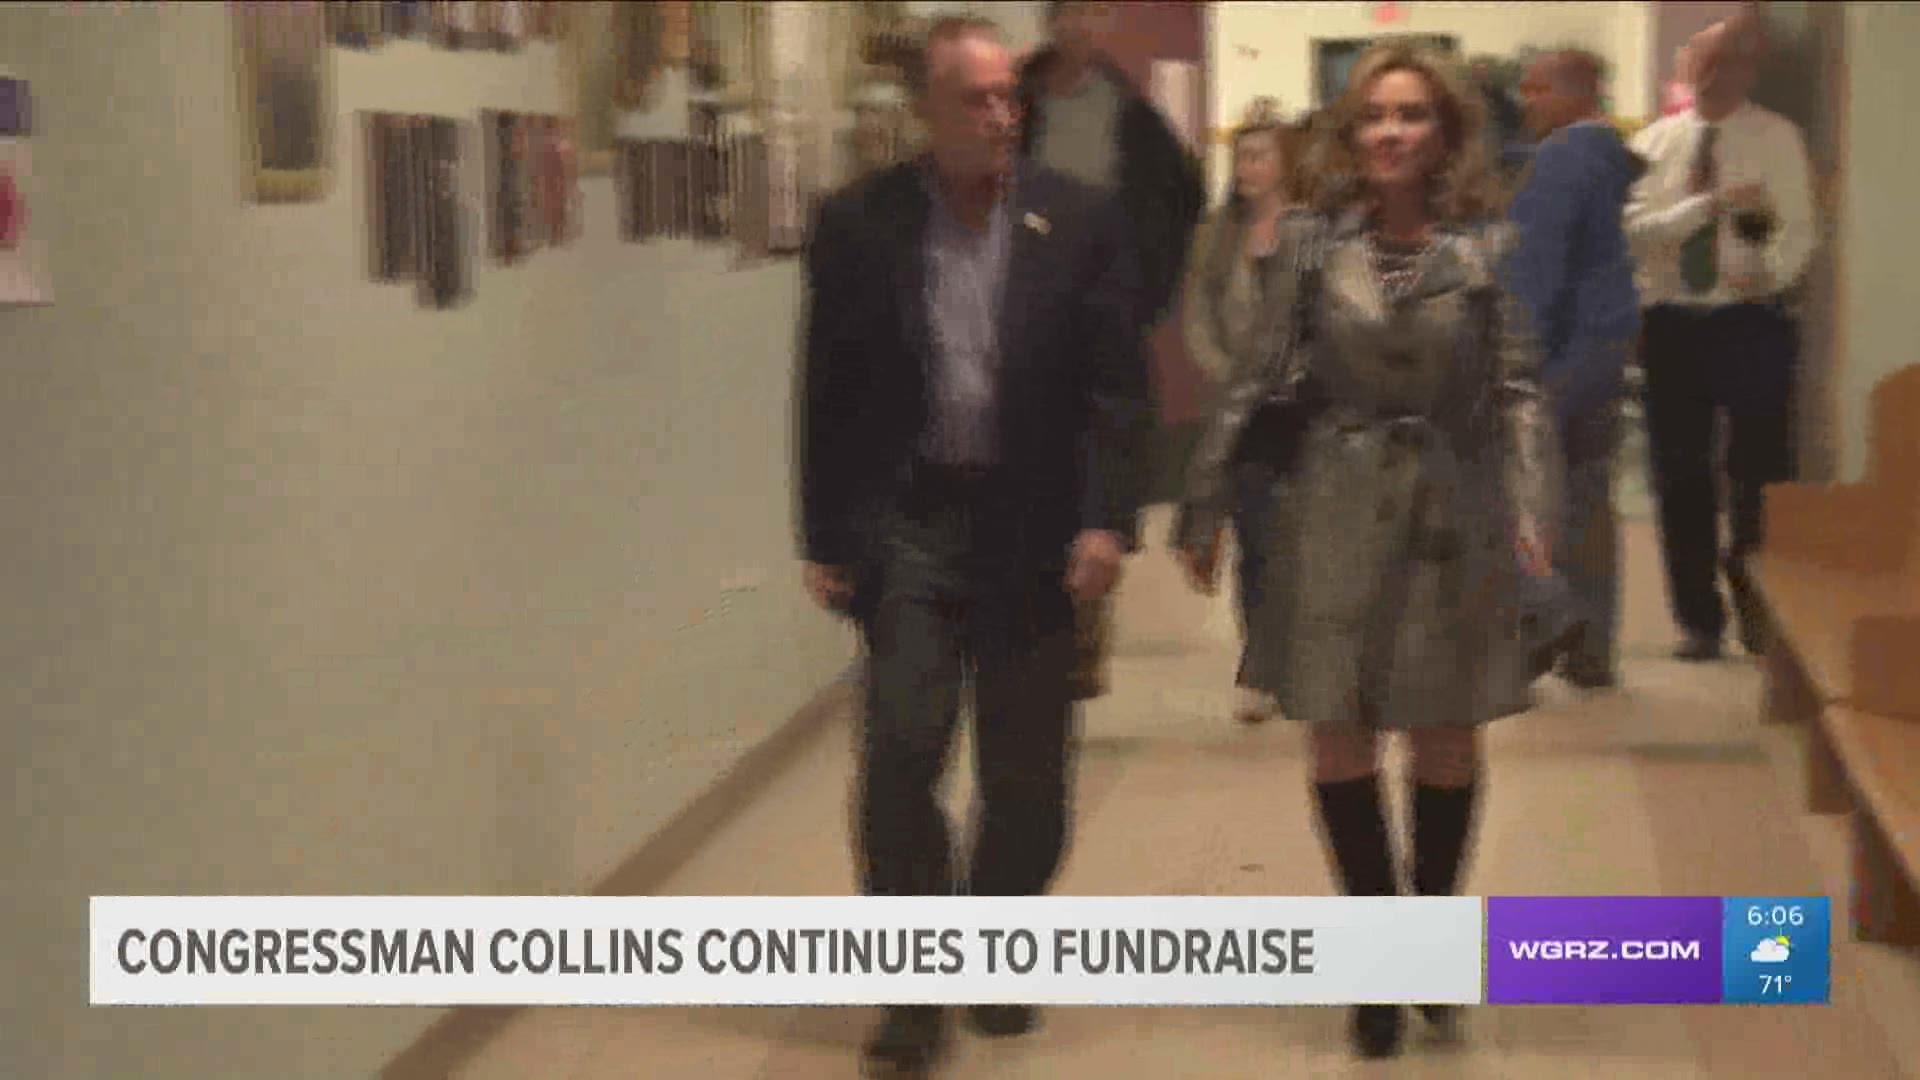 He says donations have been harder to come by since his indictment last August on federal insider trading charges.